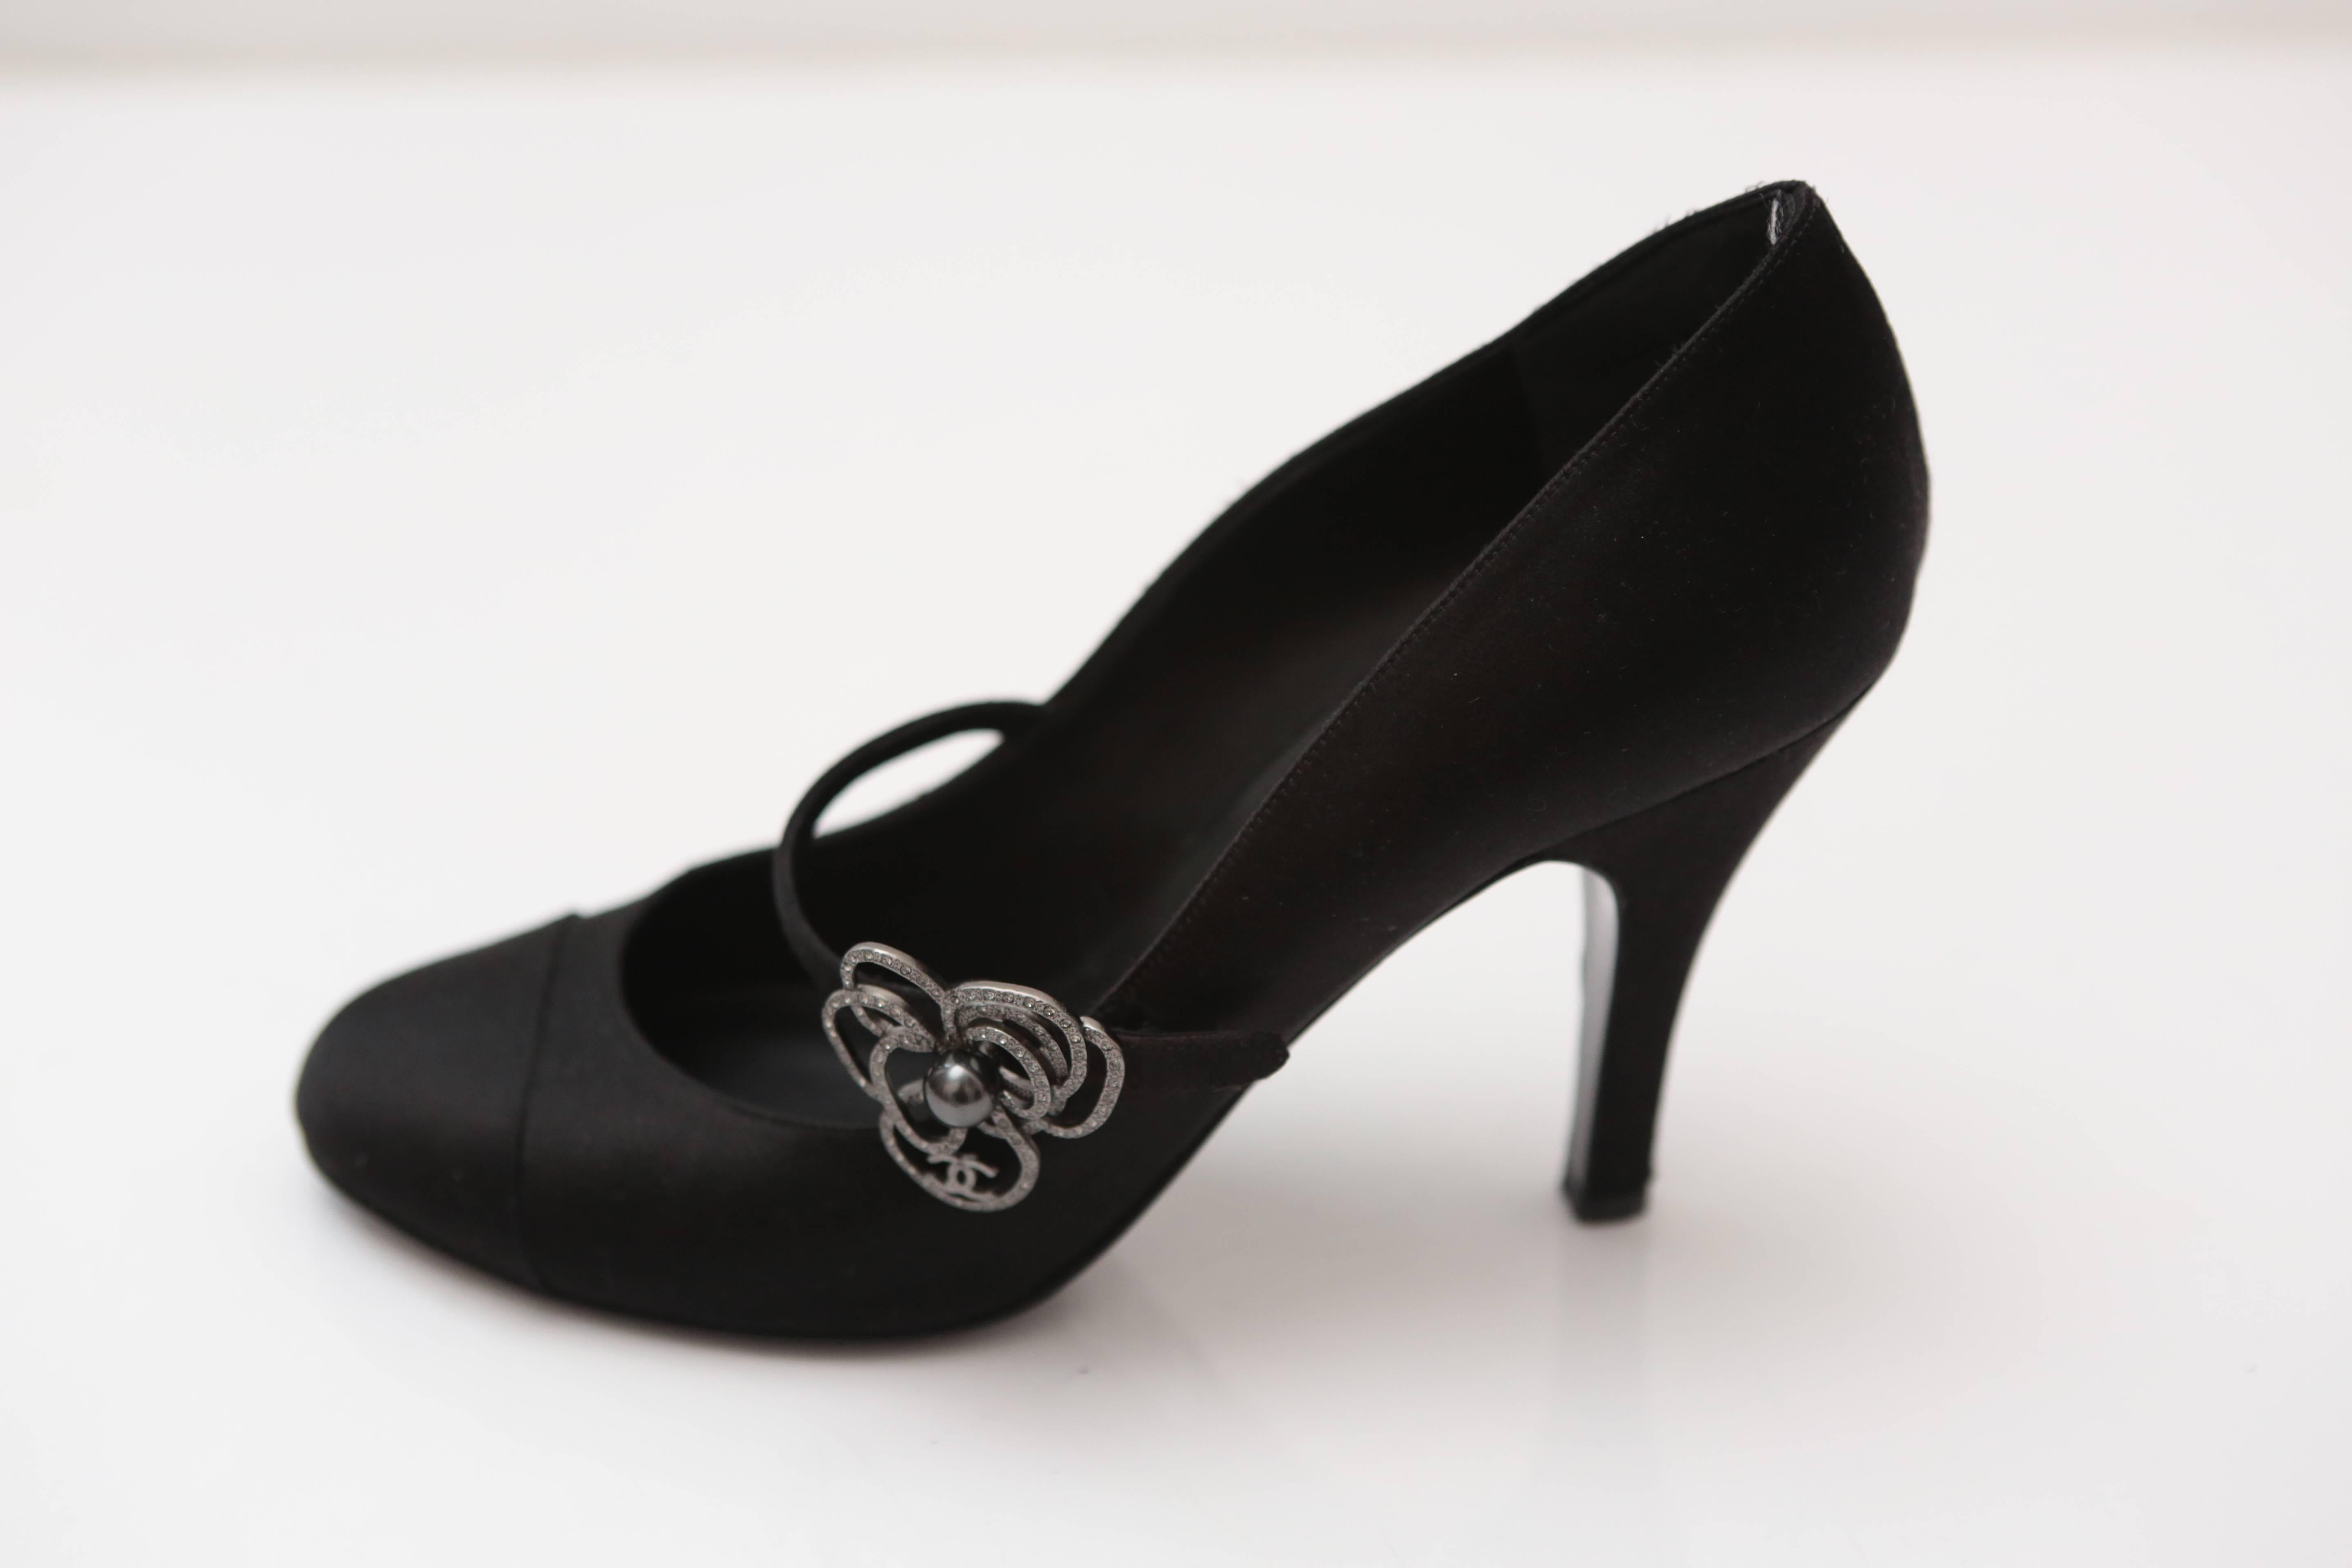 Silk Mary Jane with Camelia Flower detail in Crystal adorn this delicate evening shoe in the perfect mid-heel height. Perfect for a night out or just because.